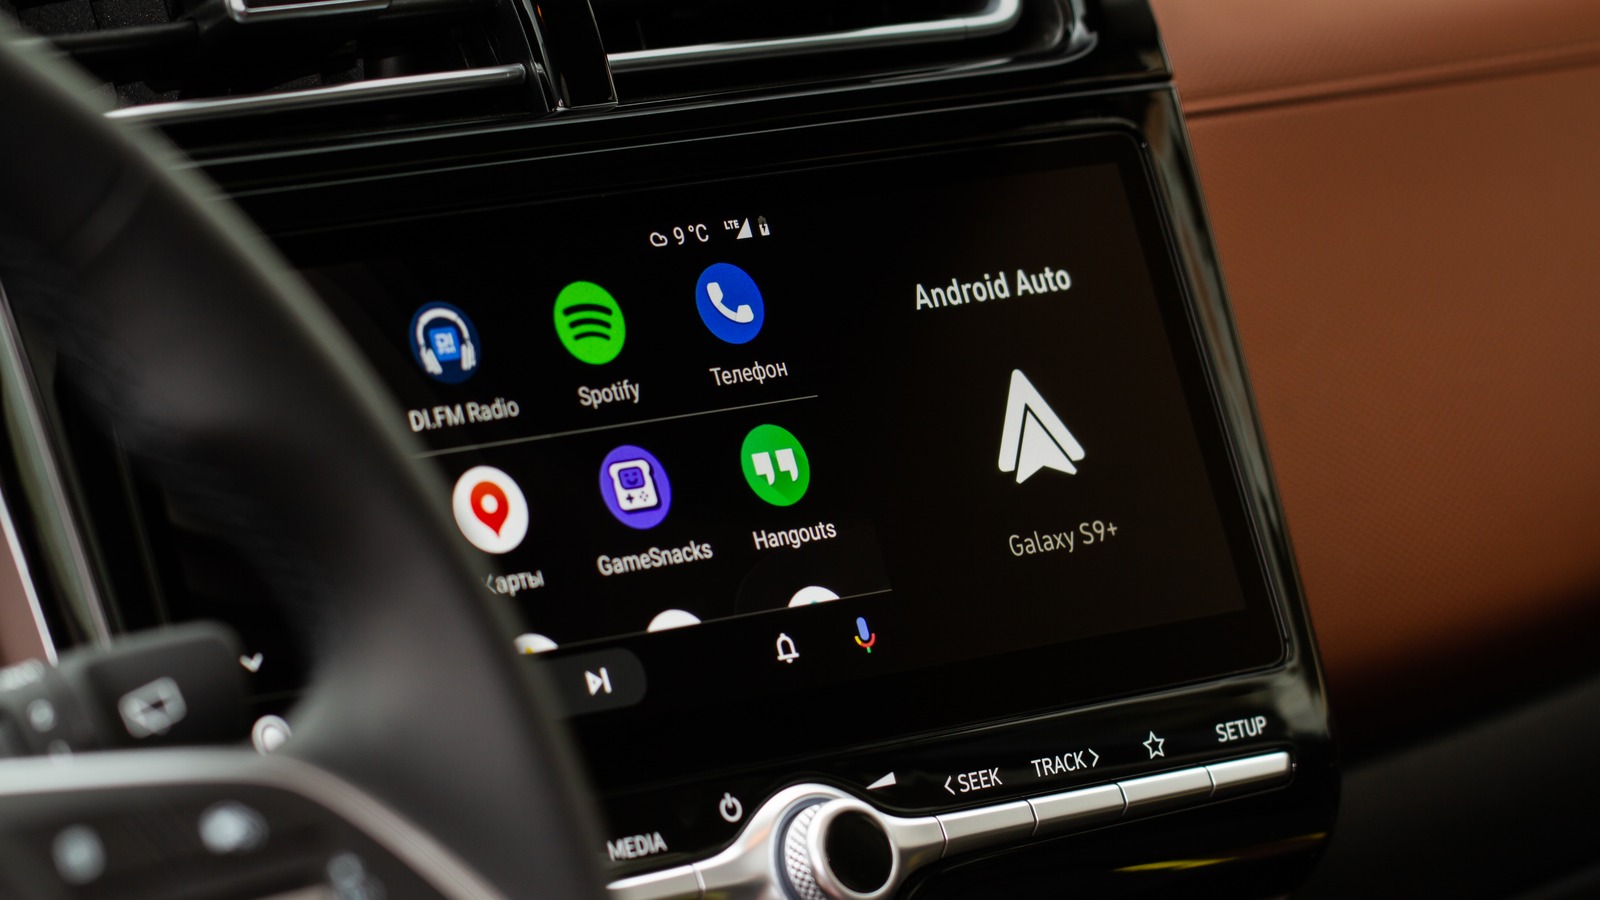 How To Install Android Auto On A Tablet